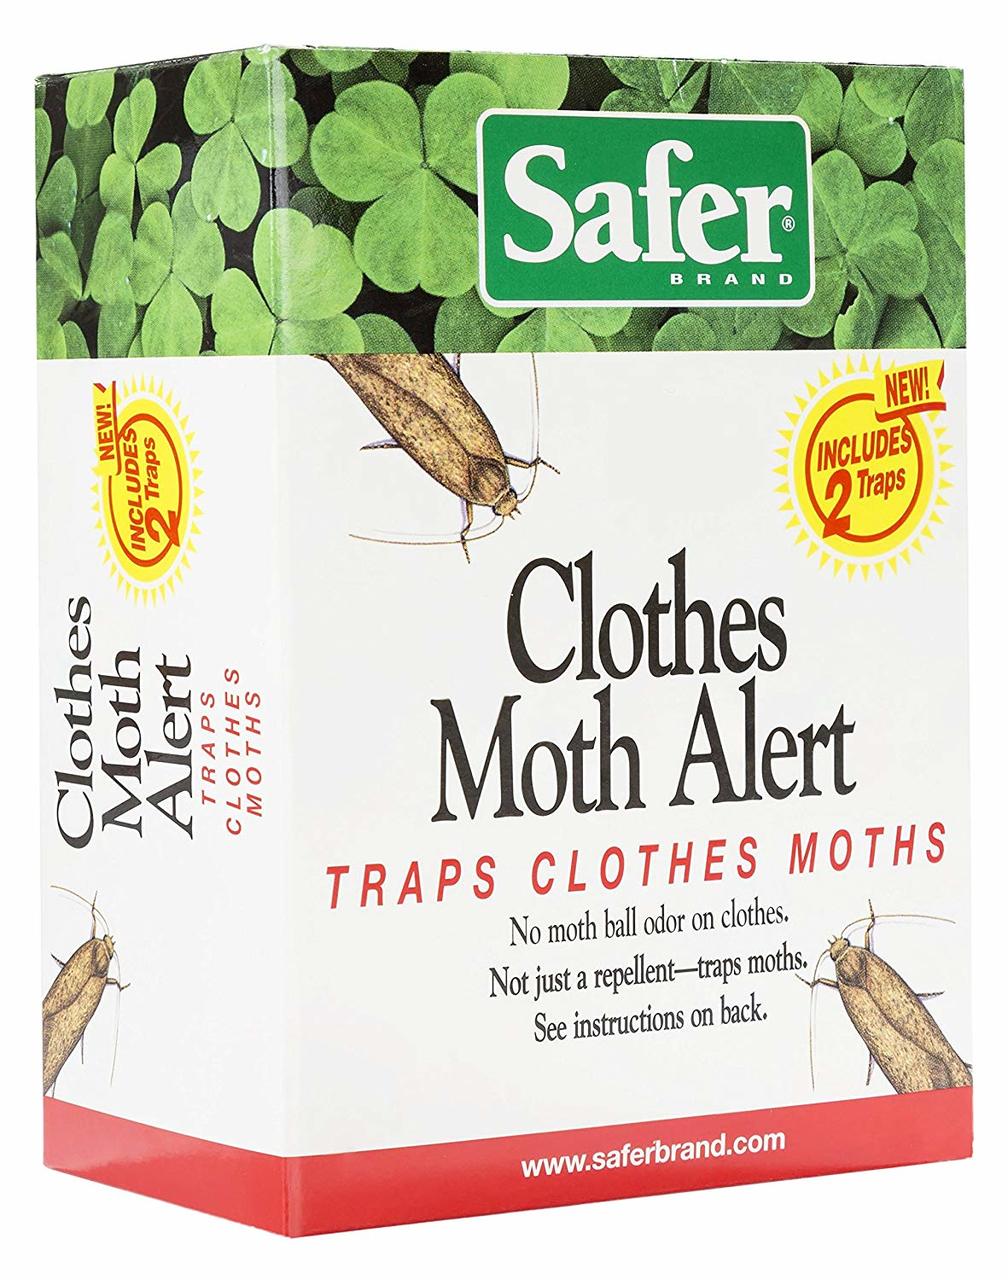 Moth Prevention Moth Traps Review: Odorless and Effective